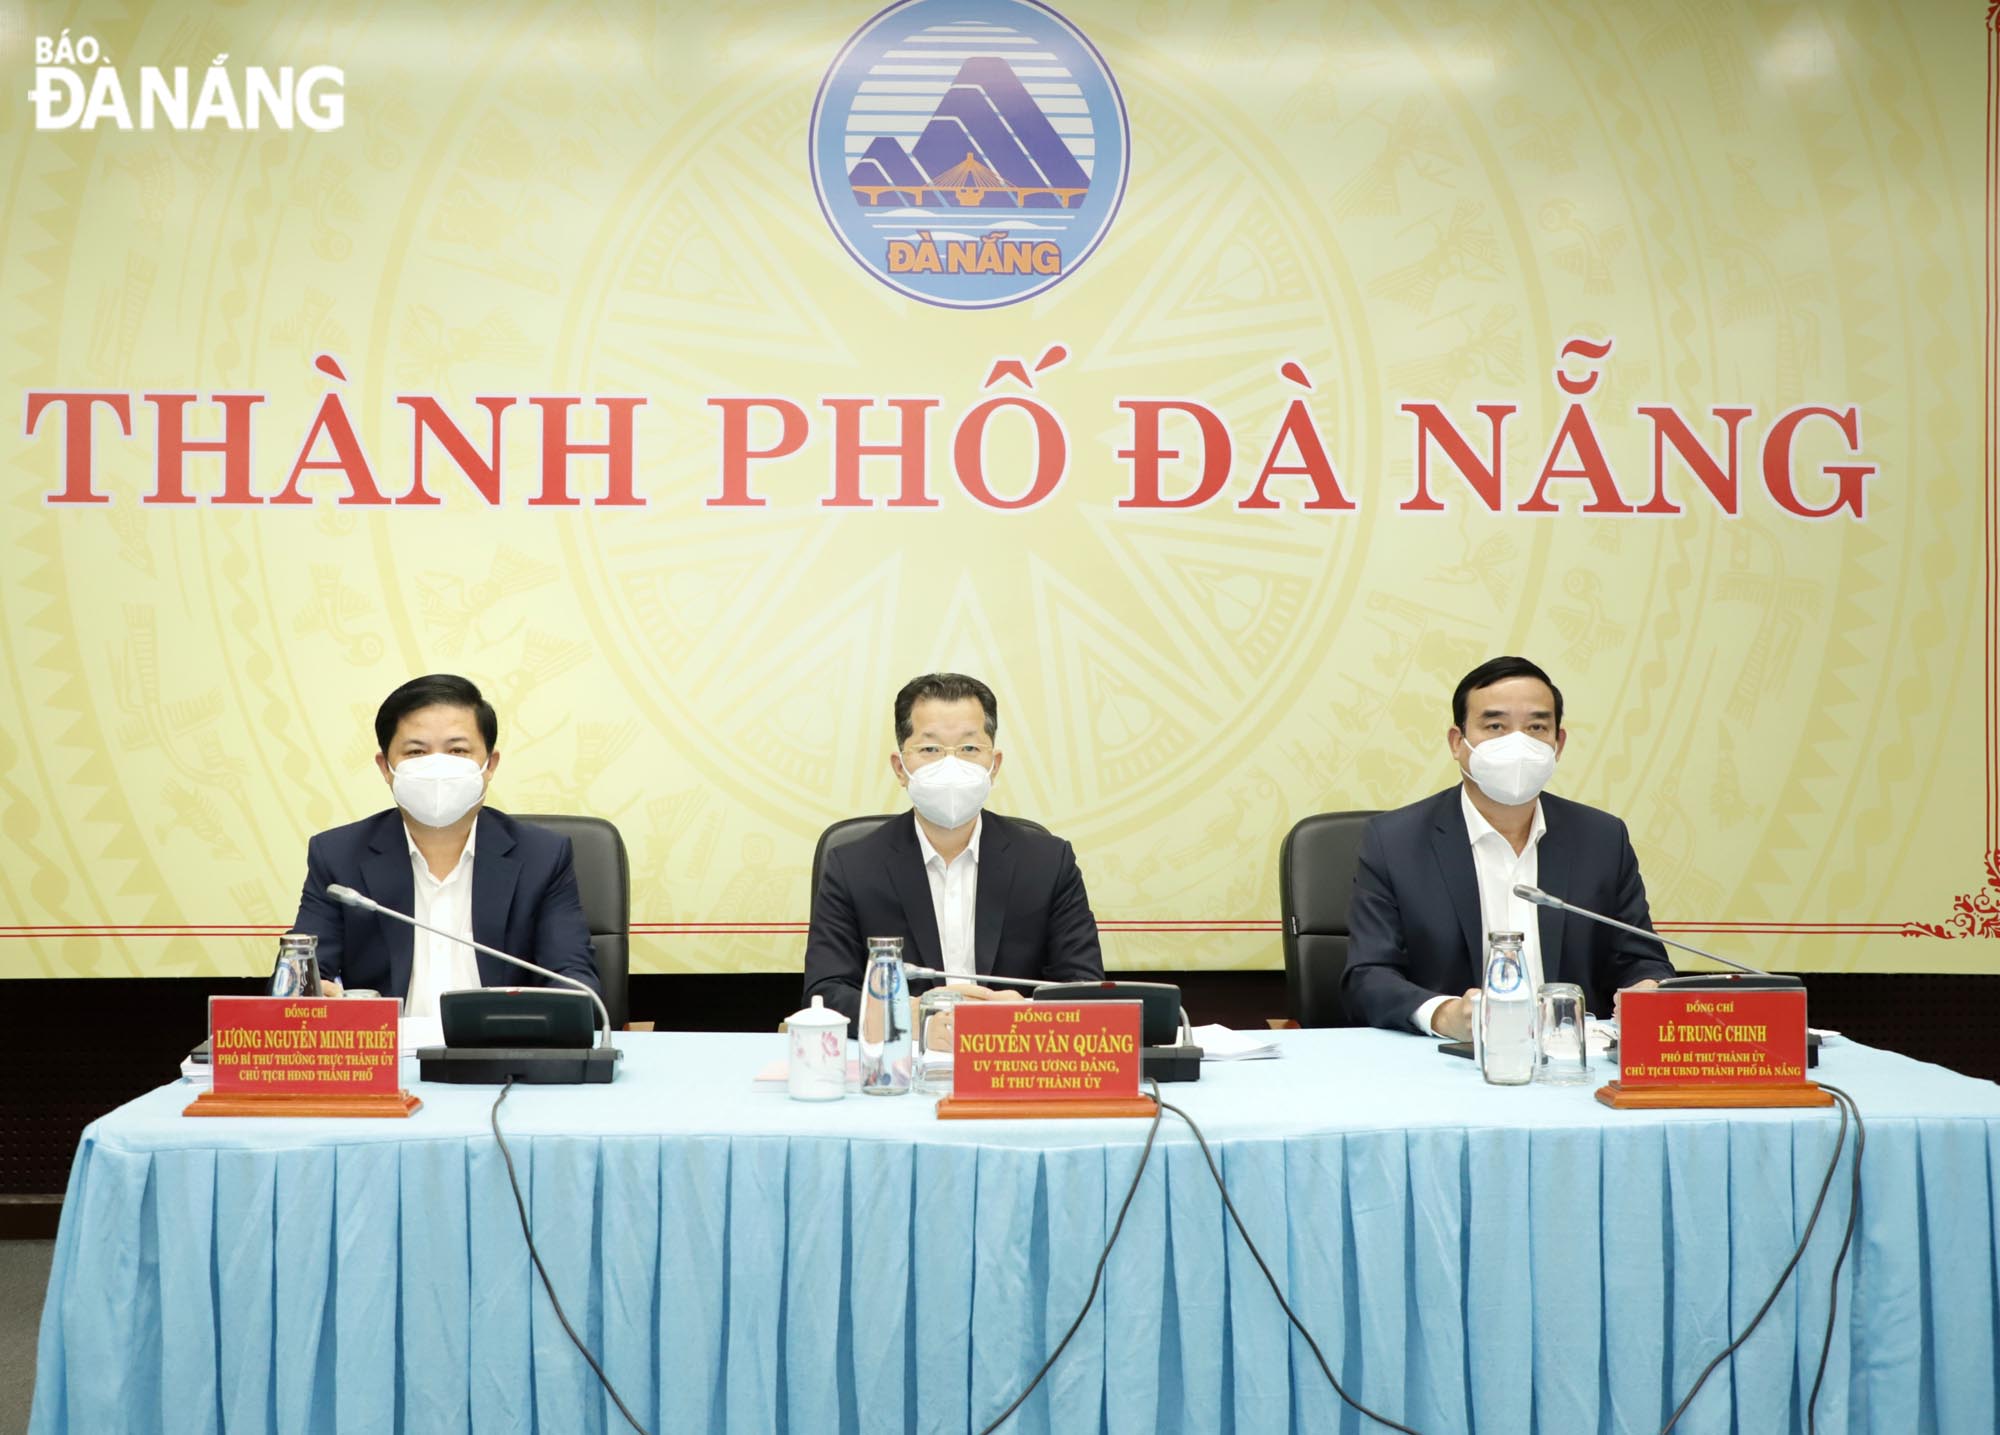 Da Nang Party Committee Secretary Nguyen Van Quang (centre), municipal Party Committee Deputy Secretary Luong Nguyen Minh Triet (left) and People's Committee Chairman Le Trung Chinh join the meeting, December 1, 2021. Photo: NGOC PHU